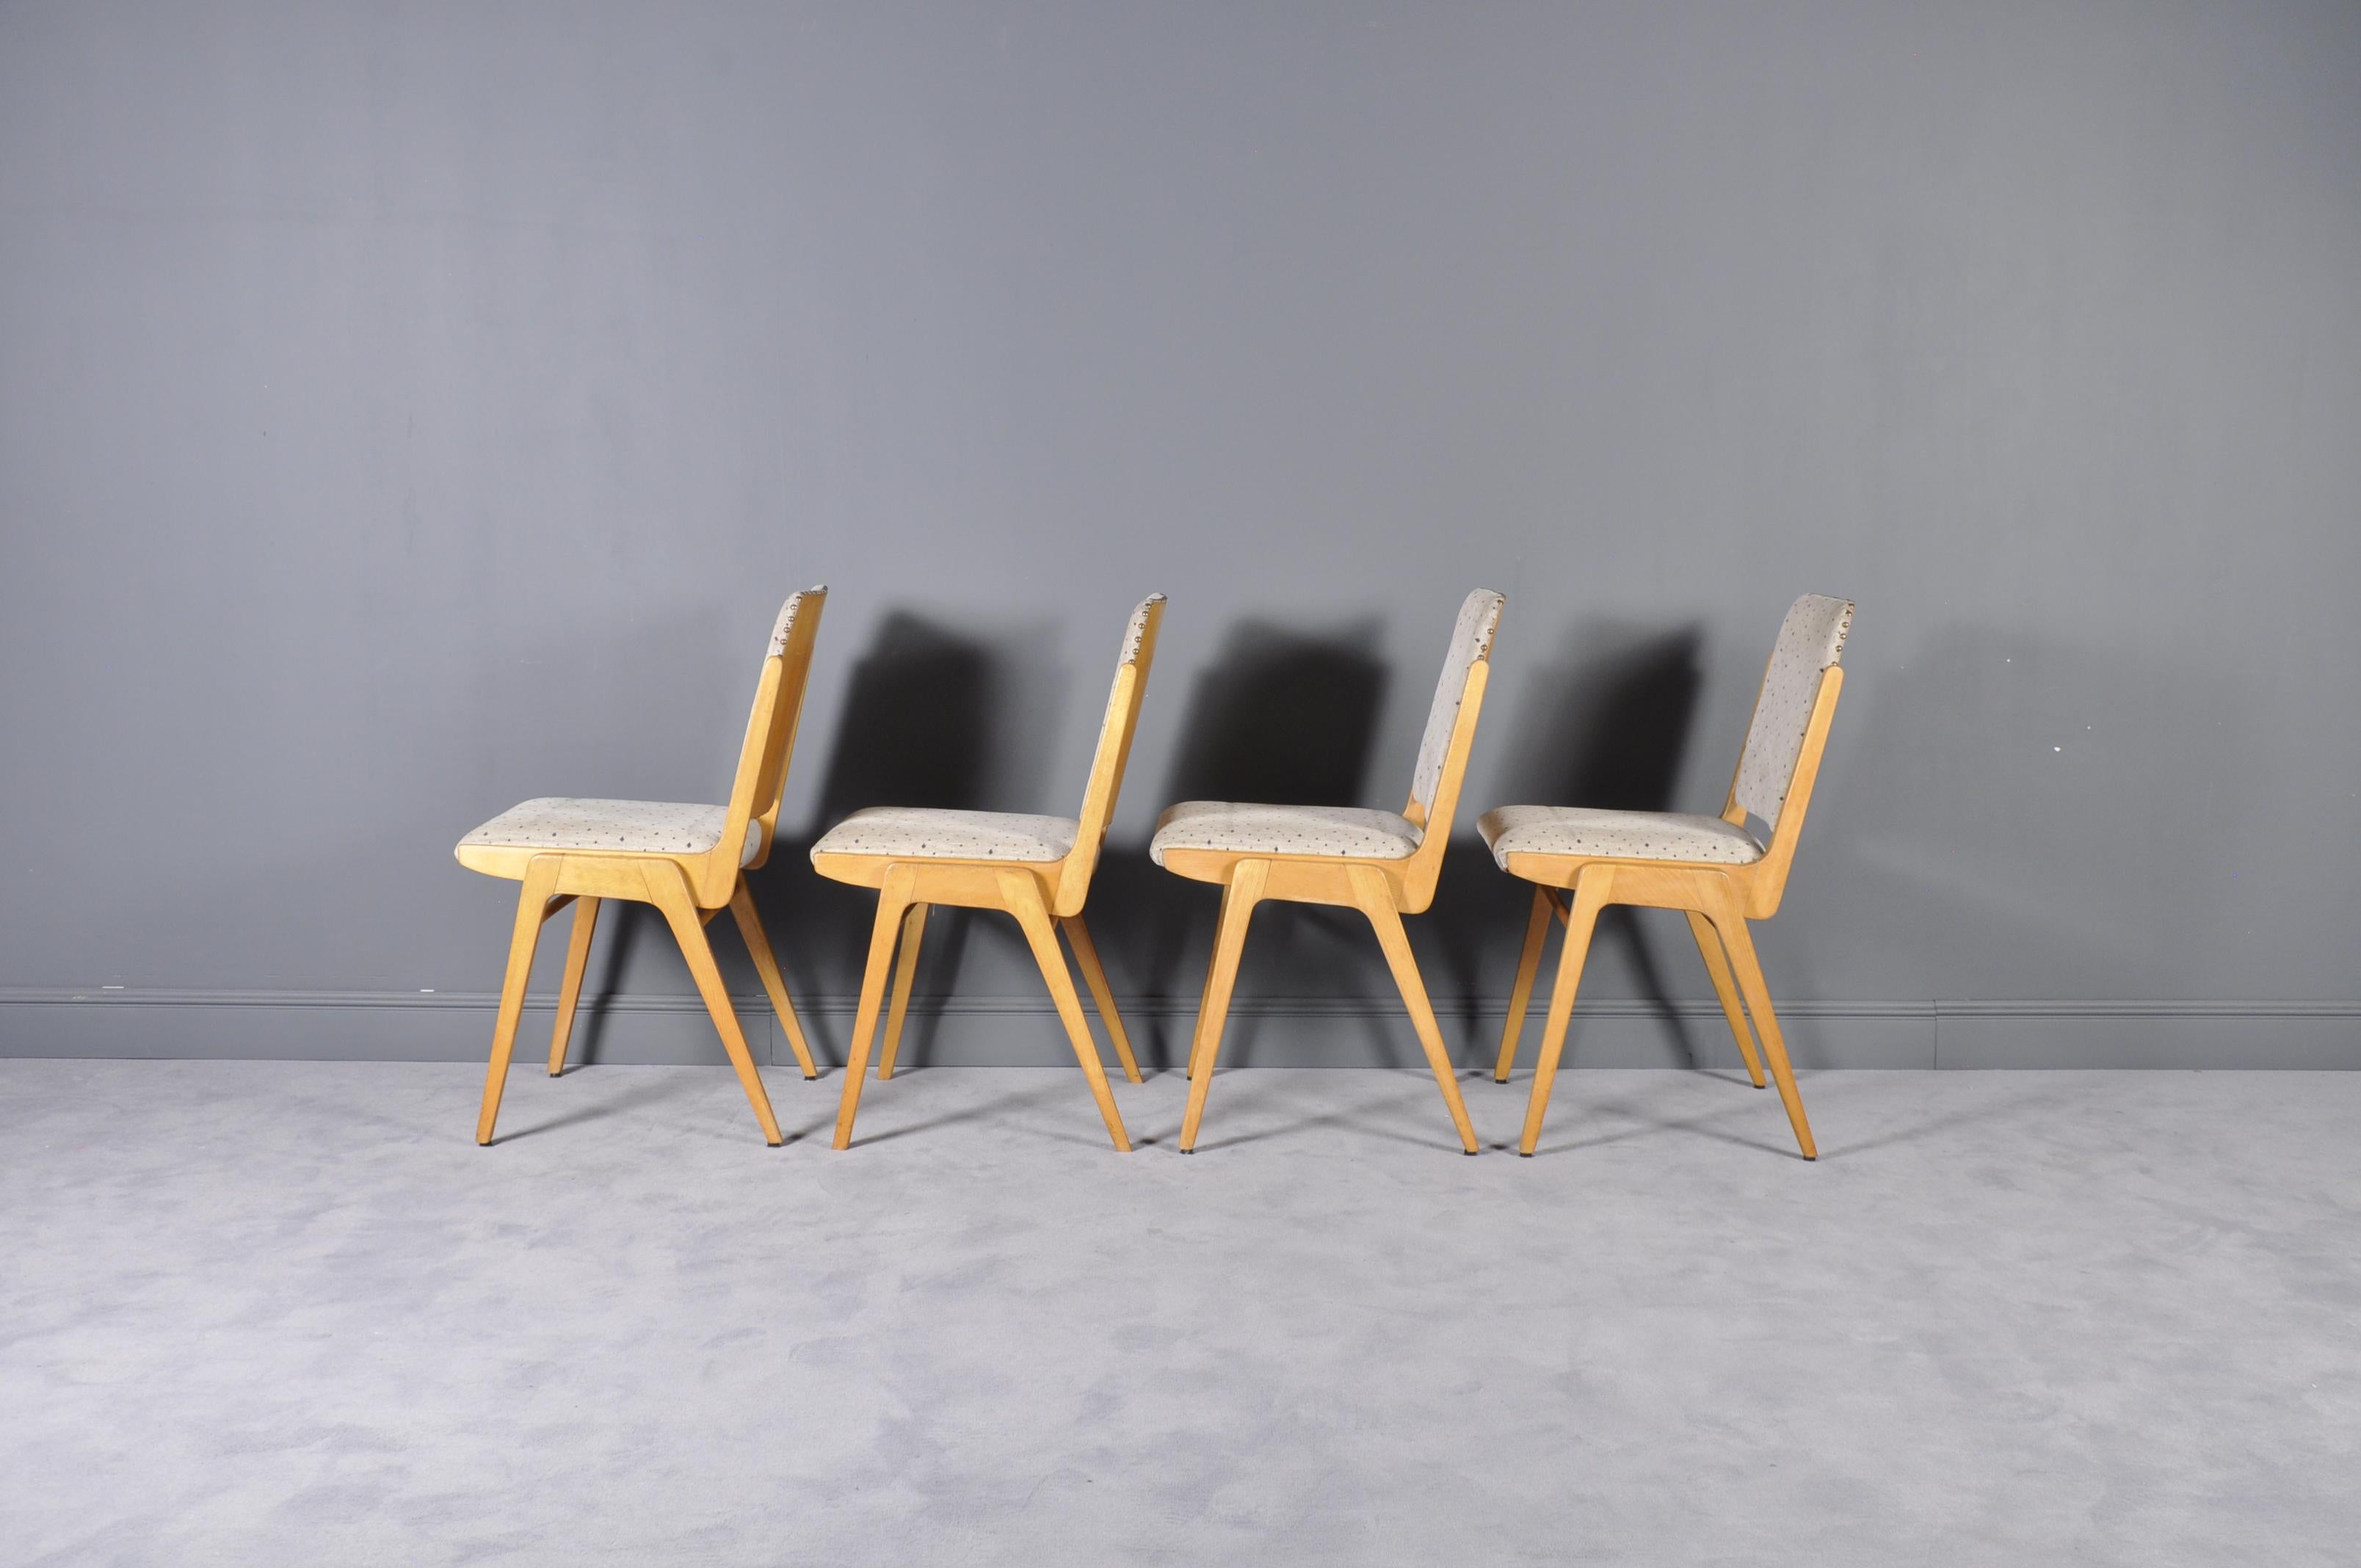 These stackable dining chairs were designed by Franz Schuster for the Forum Stadtpark Graz in 1959. They were also named Austro Chairs and were produced by Wiesner-Hager in Austria. The frames are made of solid natural beech and plywood, while the